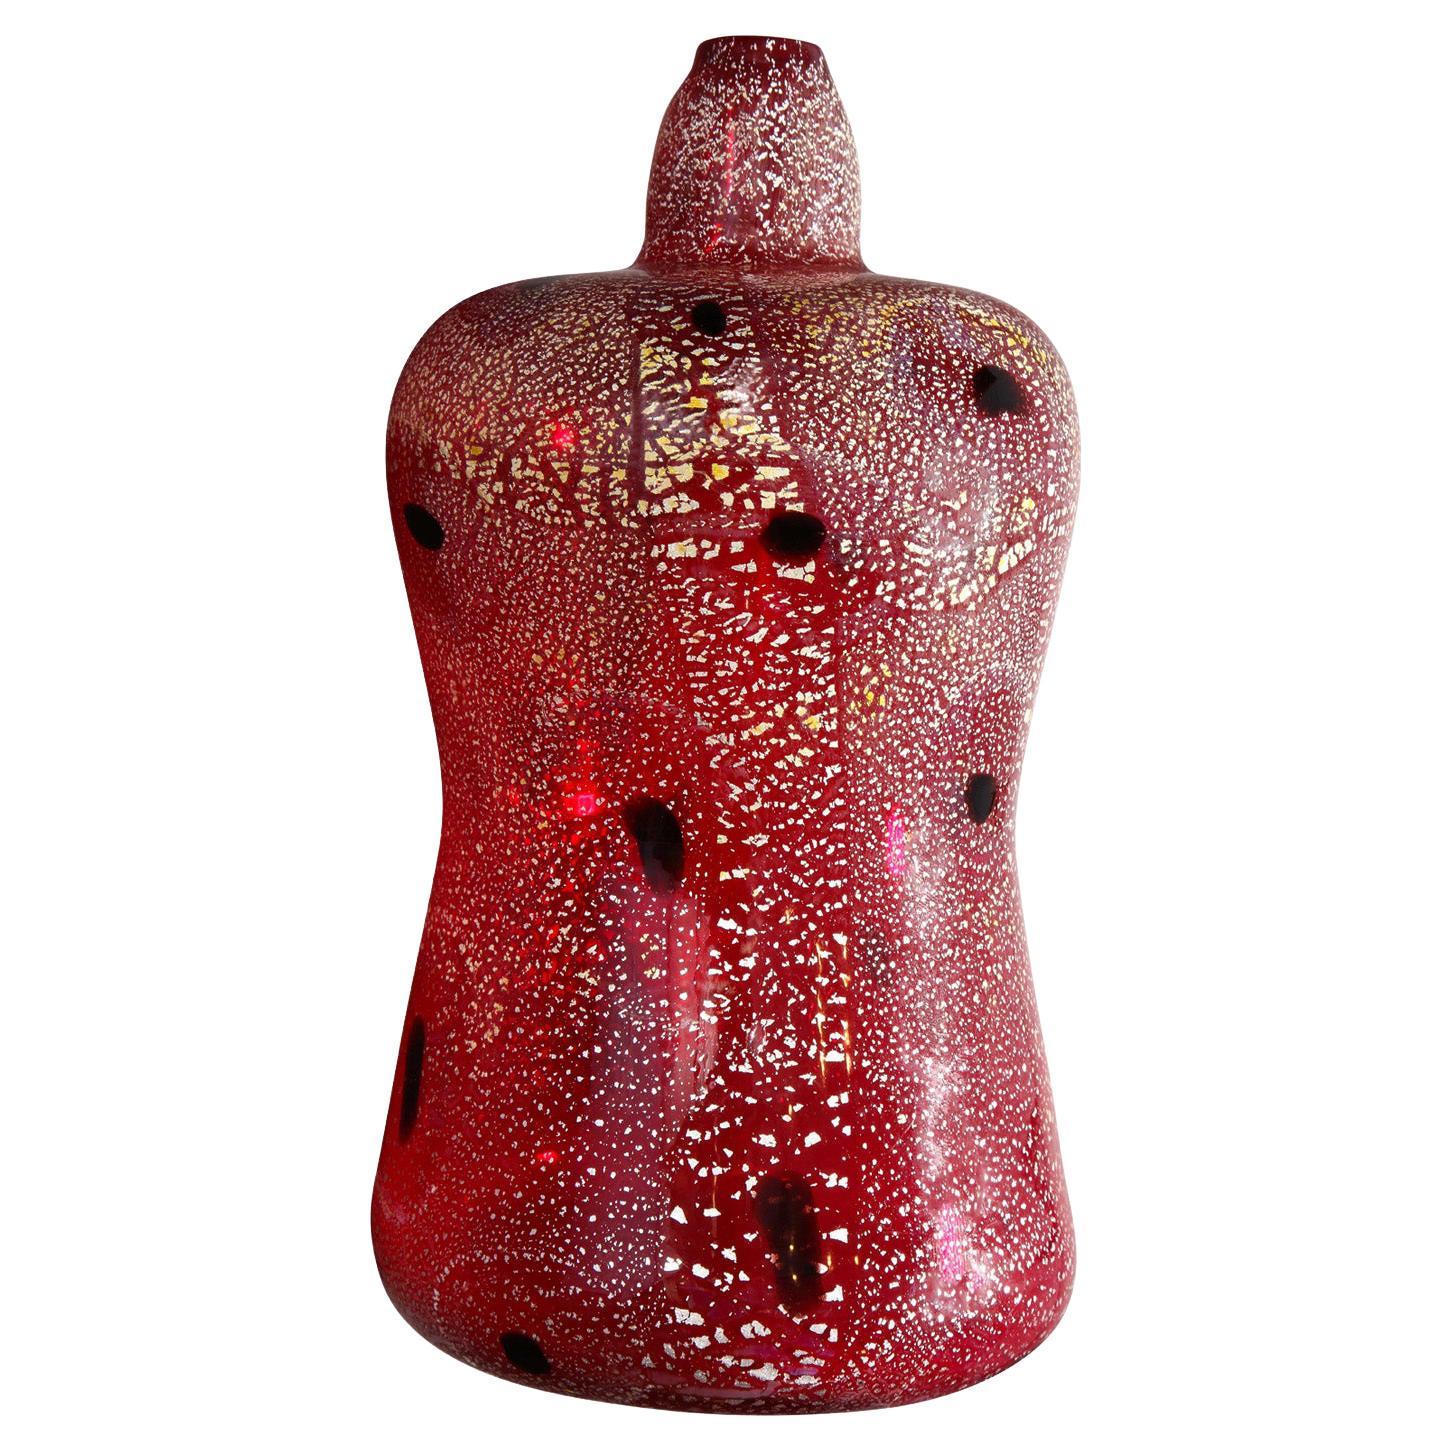 Giulio Radi Red Glass Vessel with Silver Foil and Murrhines, Ca 1950 For Sale